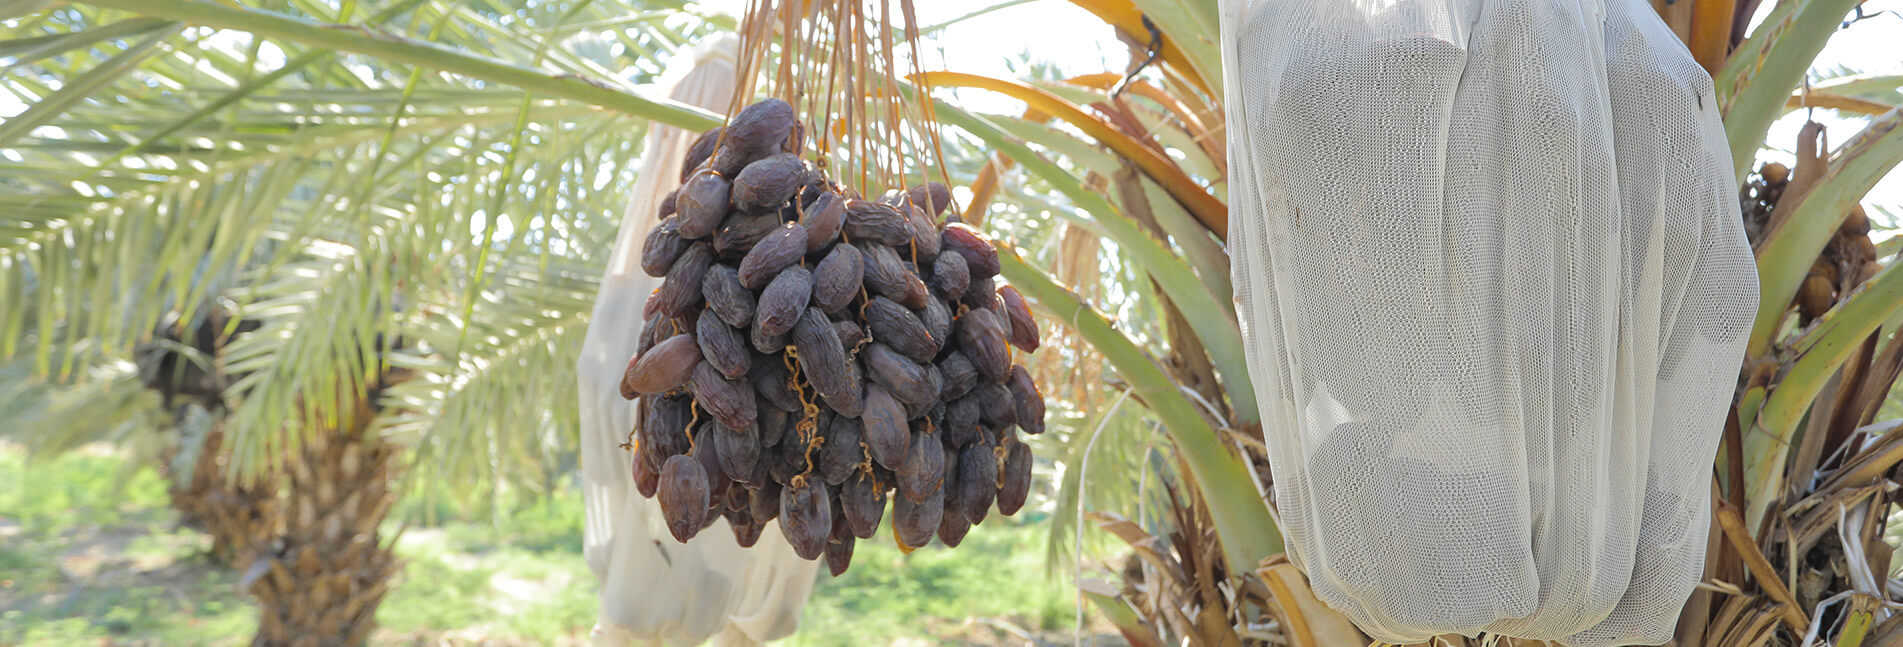 Dates Finest and first class quality of Medjool and Dates